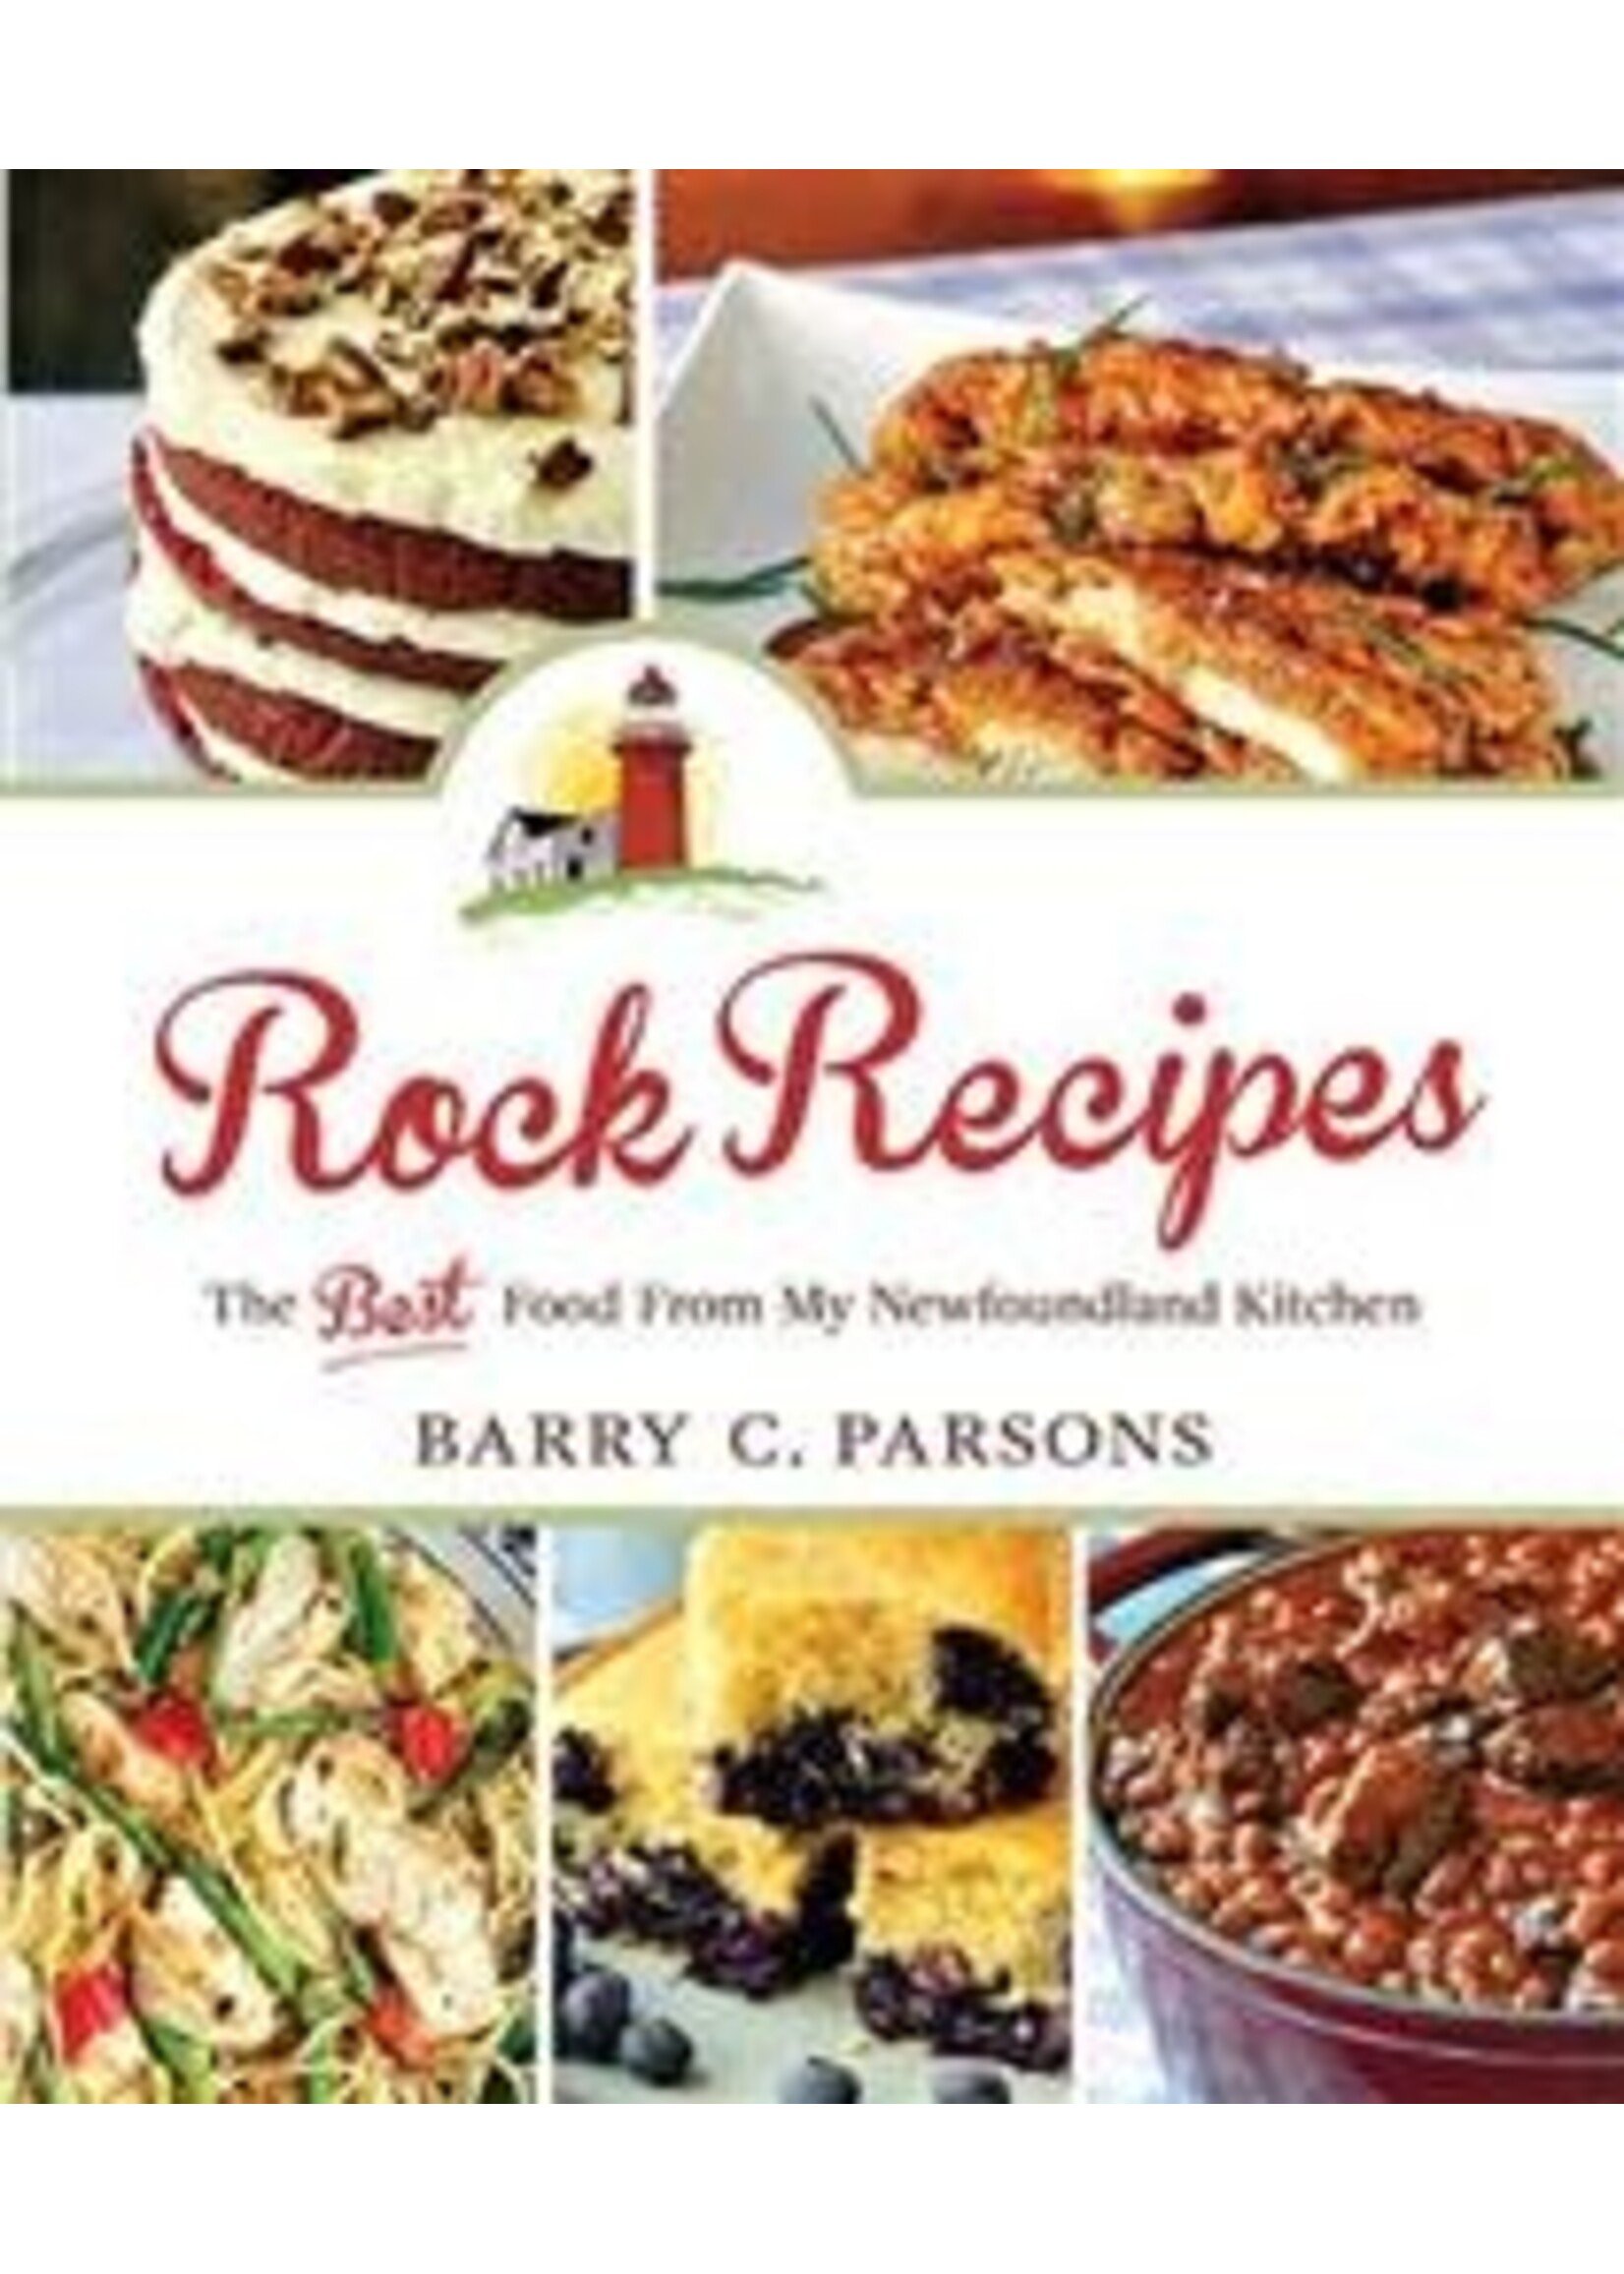 Rock Recipes: The Best Food From My Newfoundland Kitchen by Barry C. Parsons